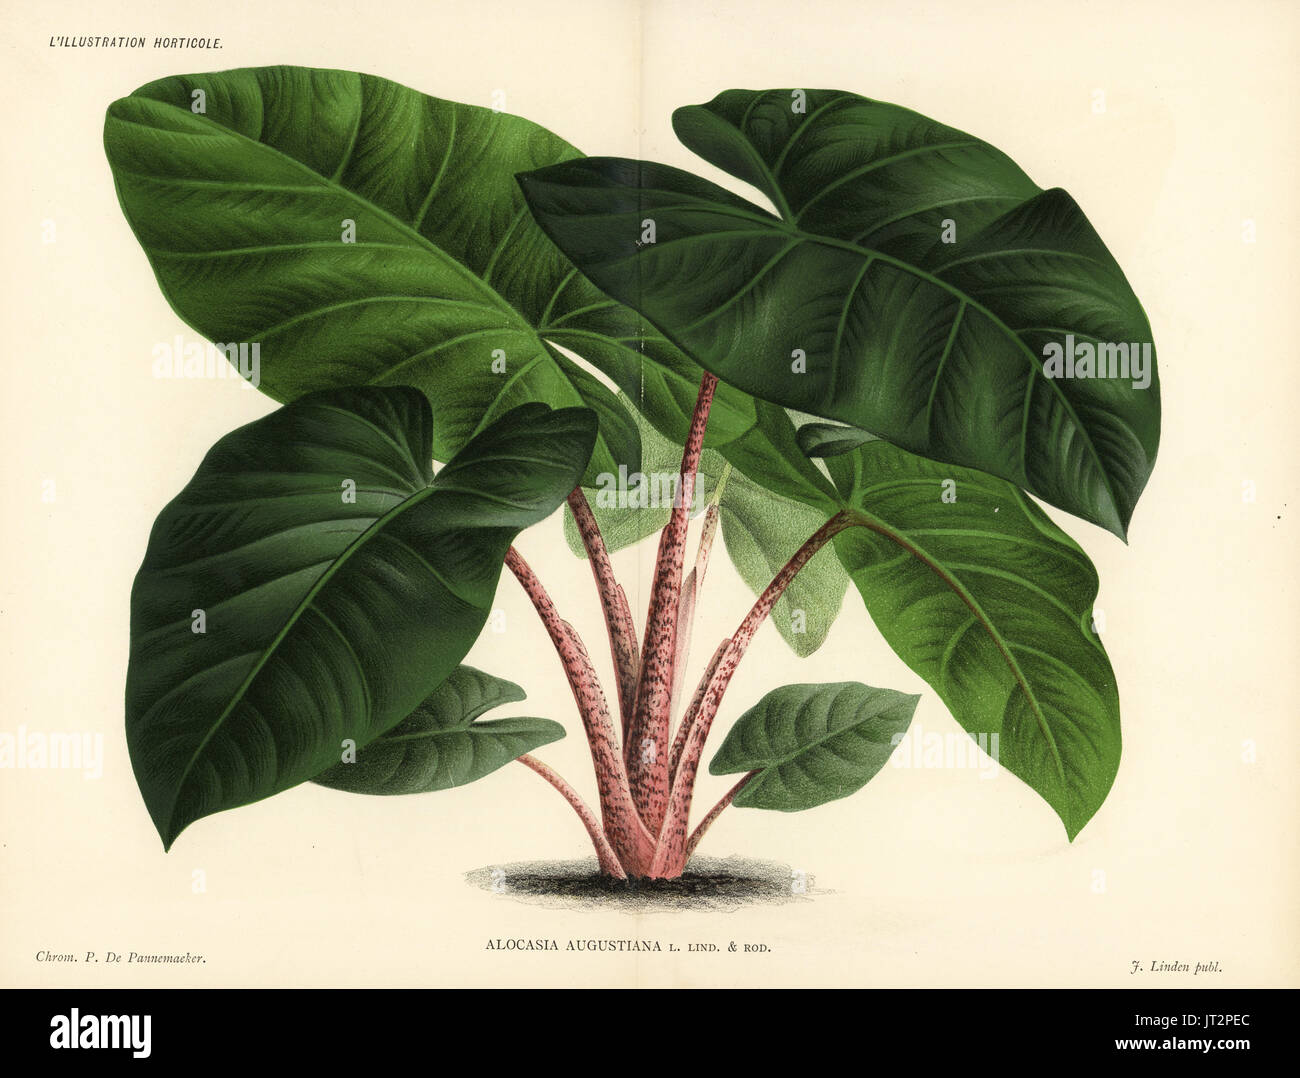 Alocasia augustiana. Chromolithograph by Pieter de Pannemaeker from Jean Linden's l'Illustration Horticole, Brussels, 1885. Stock Photo